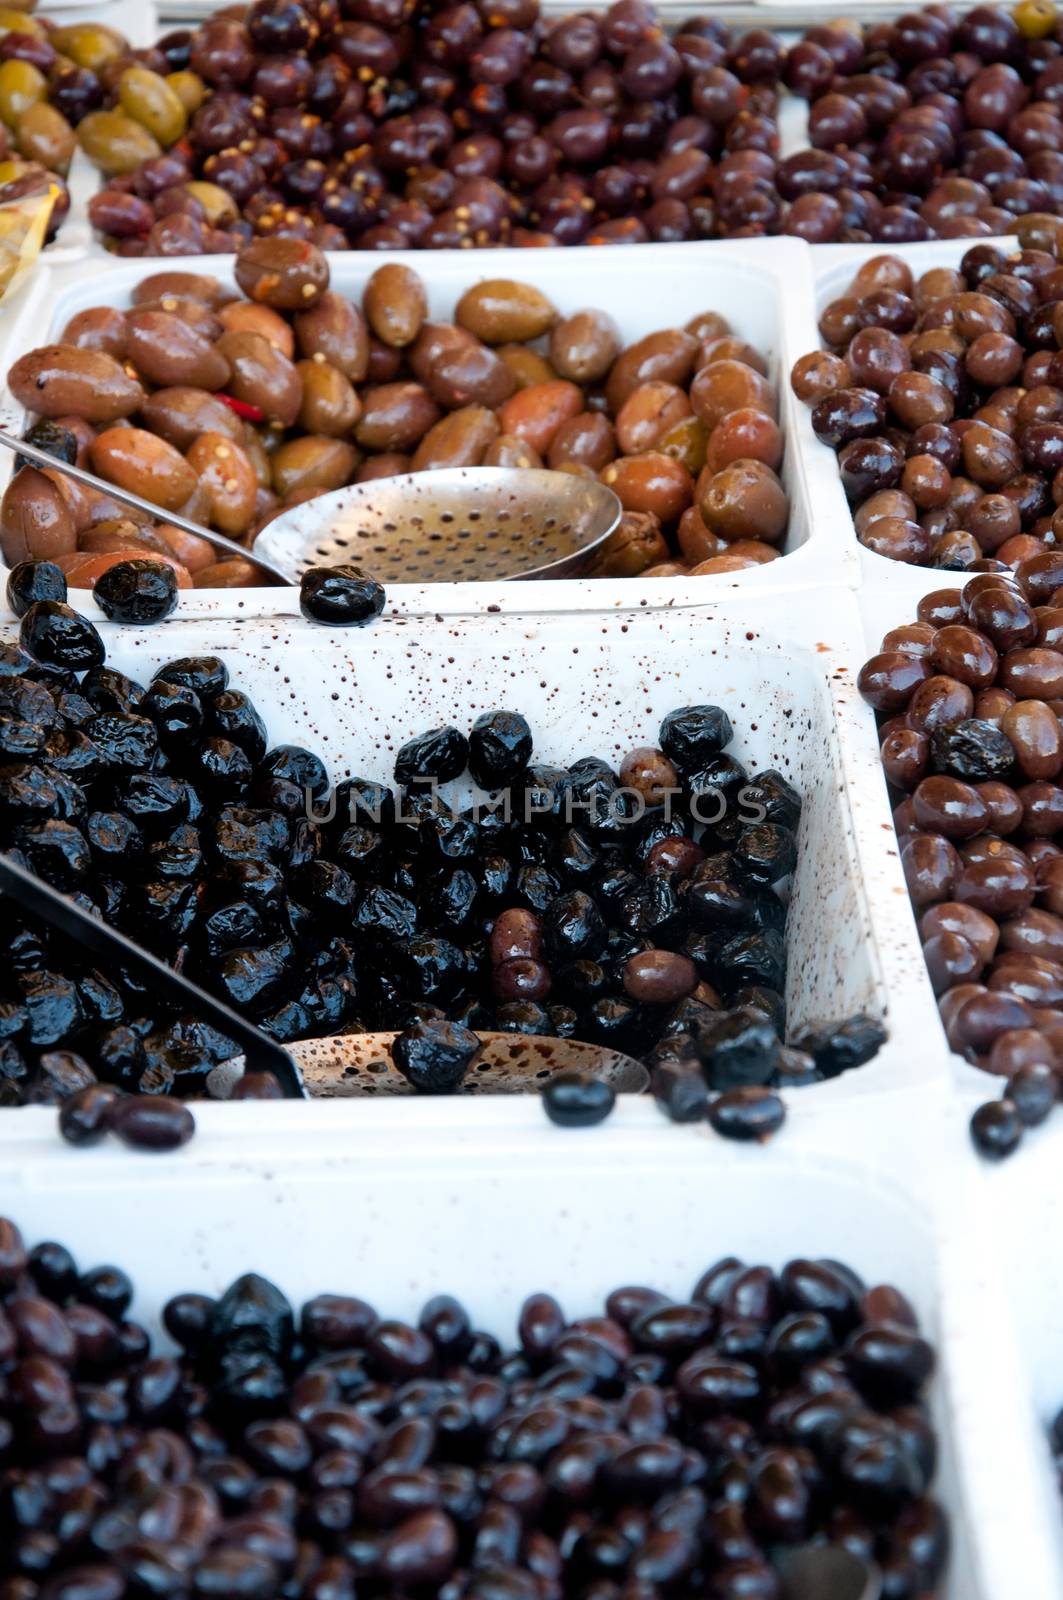 Container containing olives of various colors